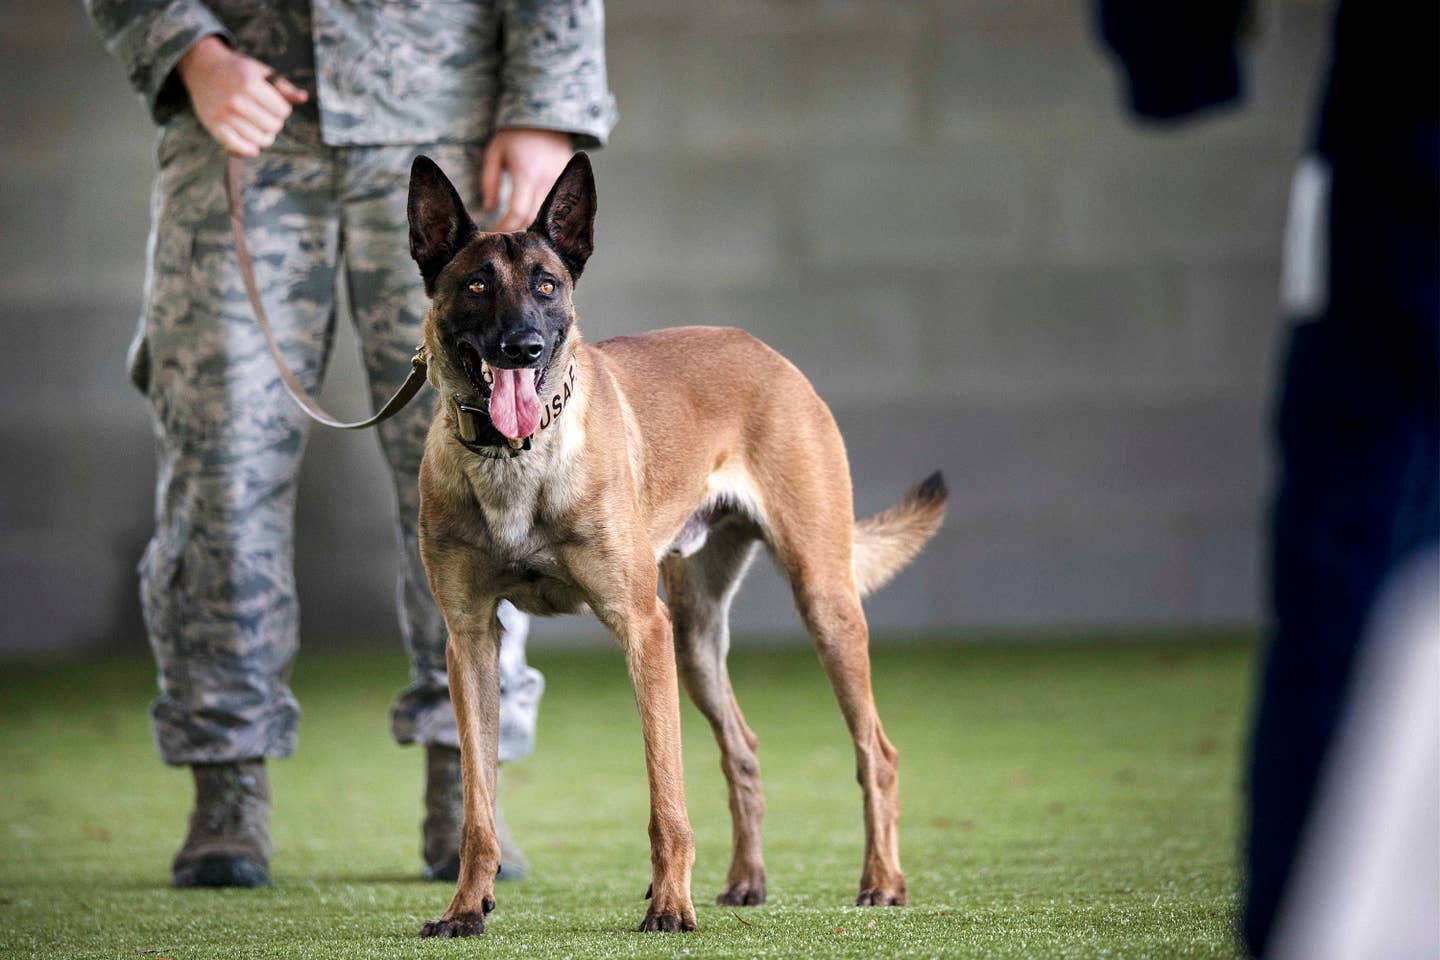 Military Working Dog Ttoby, 23d Security Forces Squadron, prepares for an MWD demonstration, Feb. 2, 2017, at Moody Air Force Base, Ga. Ttoby is a Belgian Malinois and specializes in personnel protection and detecting explosives. (U.S. Air Force photo by Tech. Sgt. Zachary Wolf)